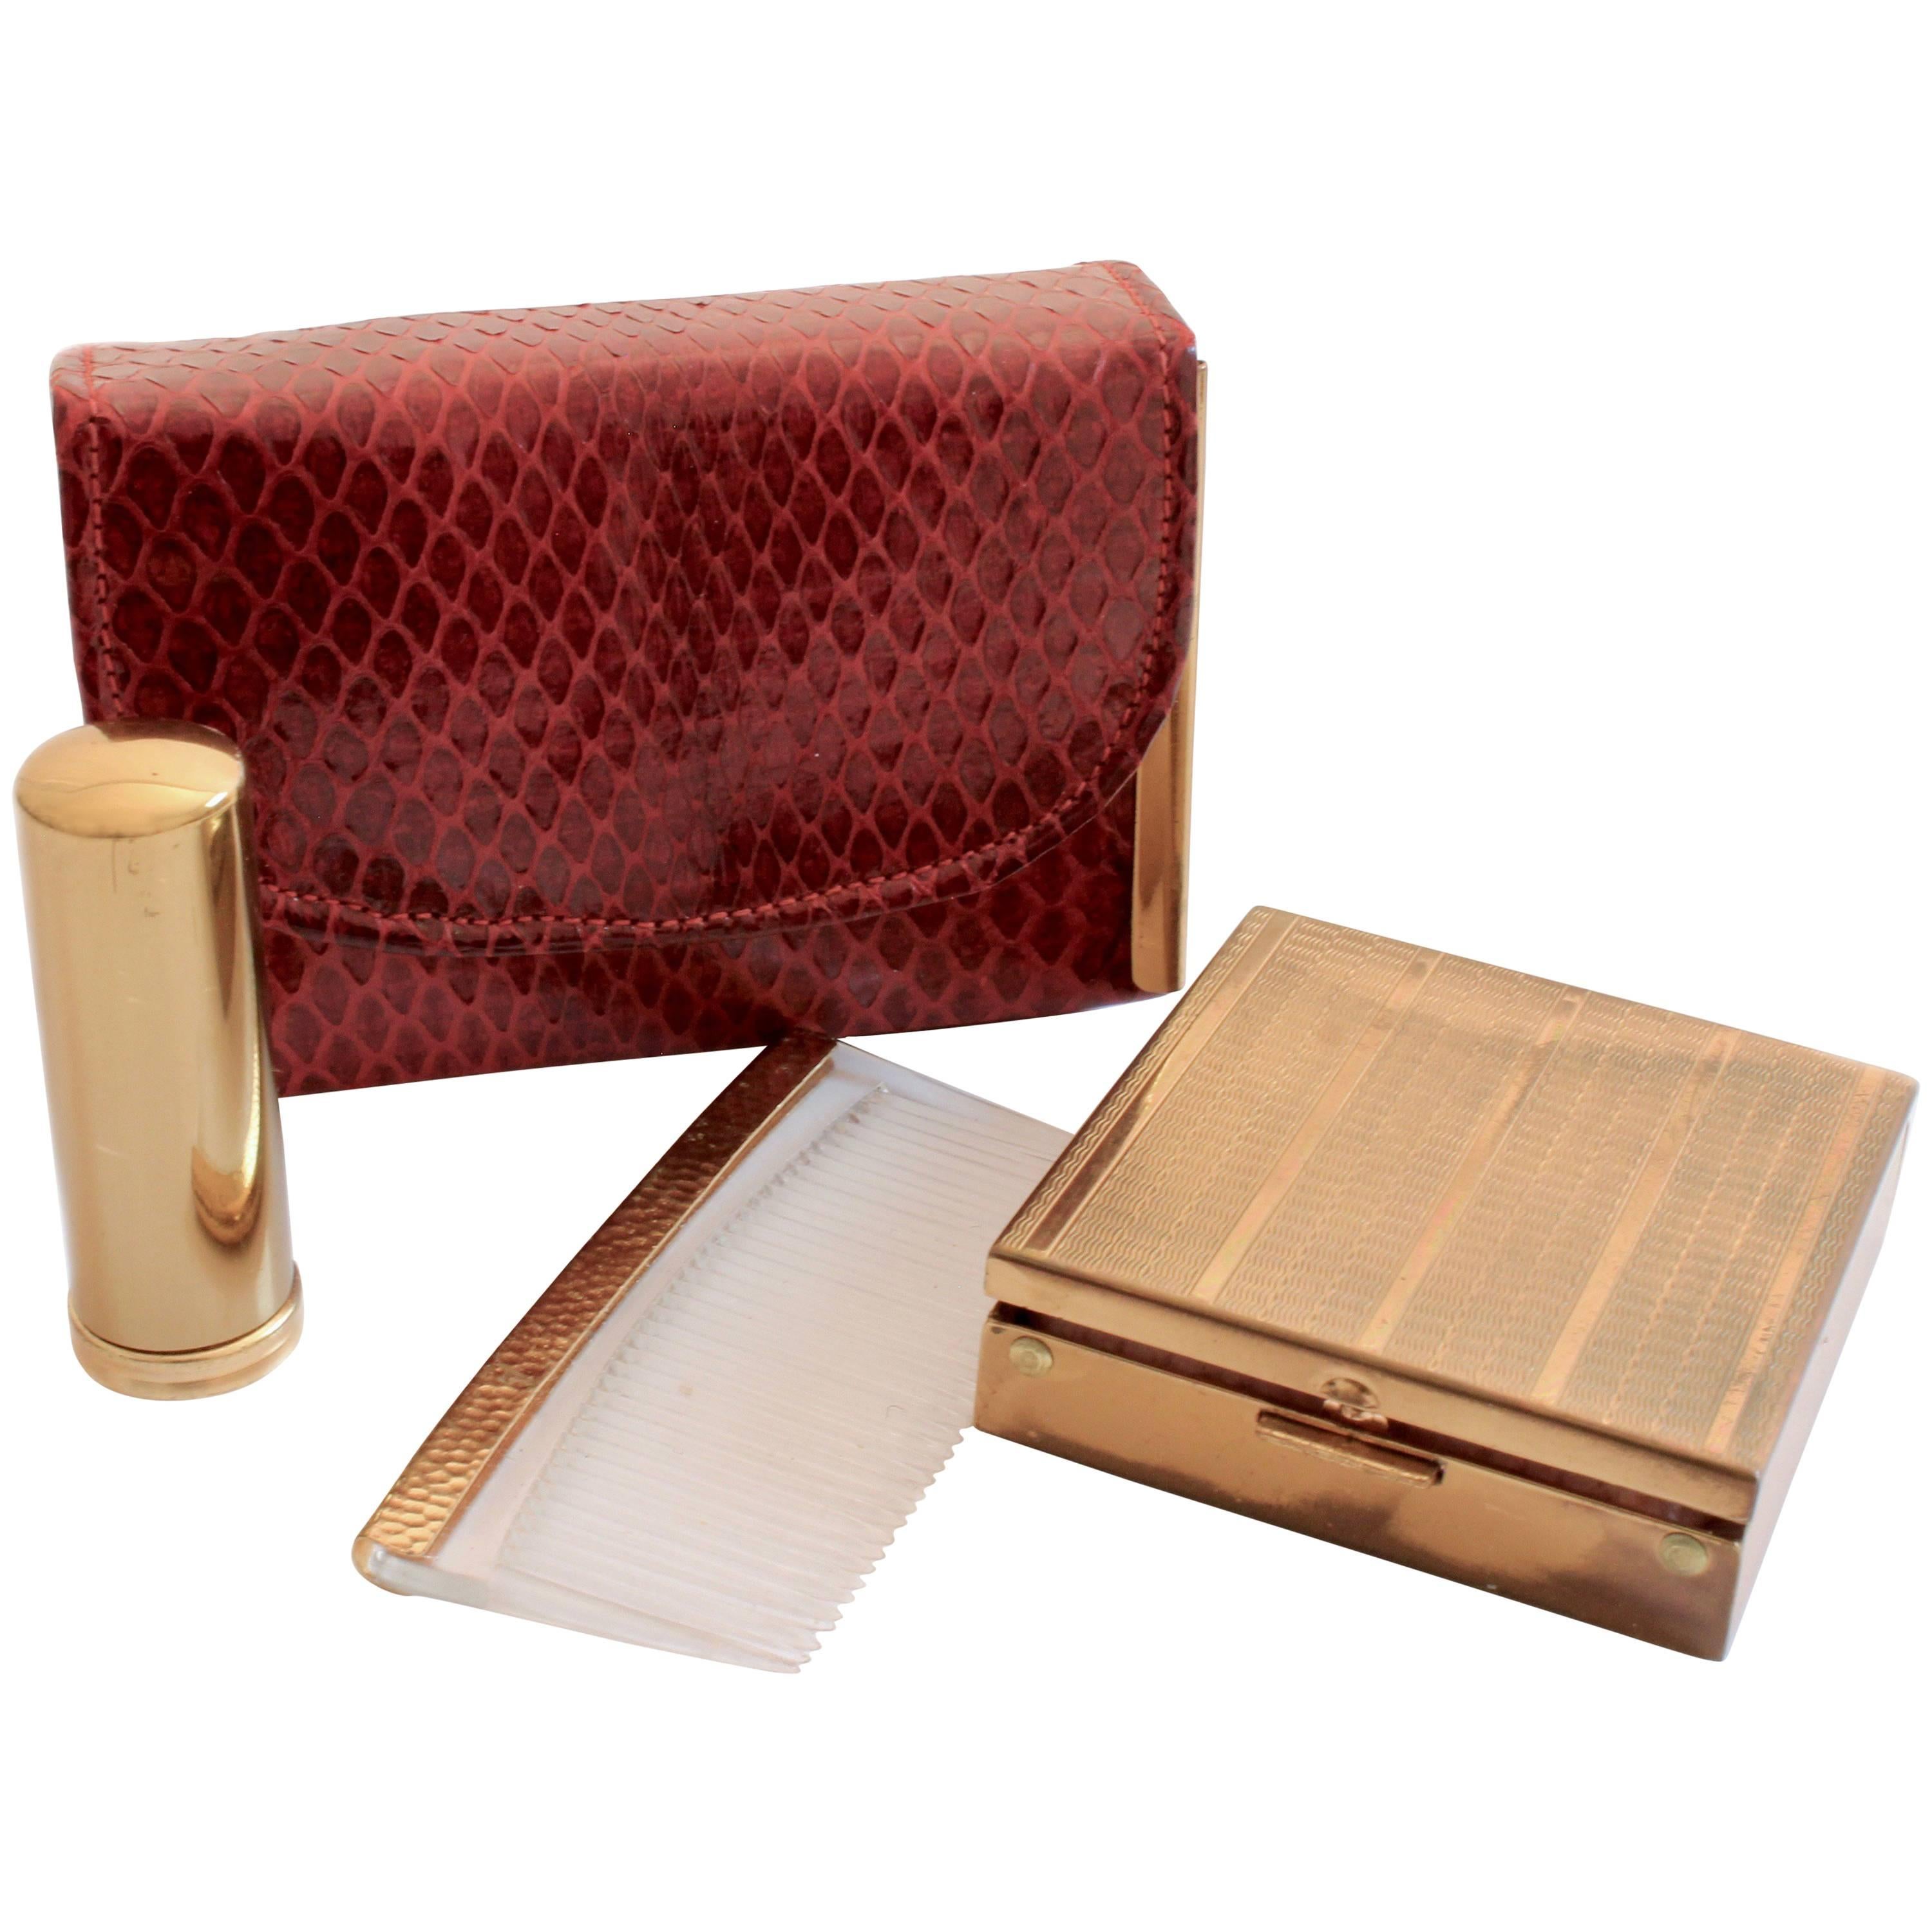 Rex Fifth Ave Snakeskin Mini Clutch + Compact Mirror Lipstick Holder Comb 1950s